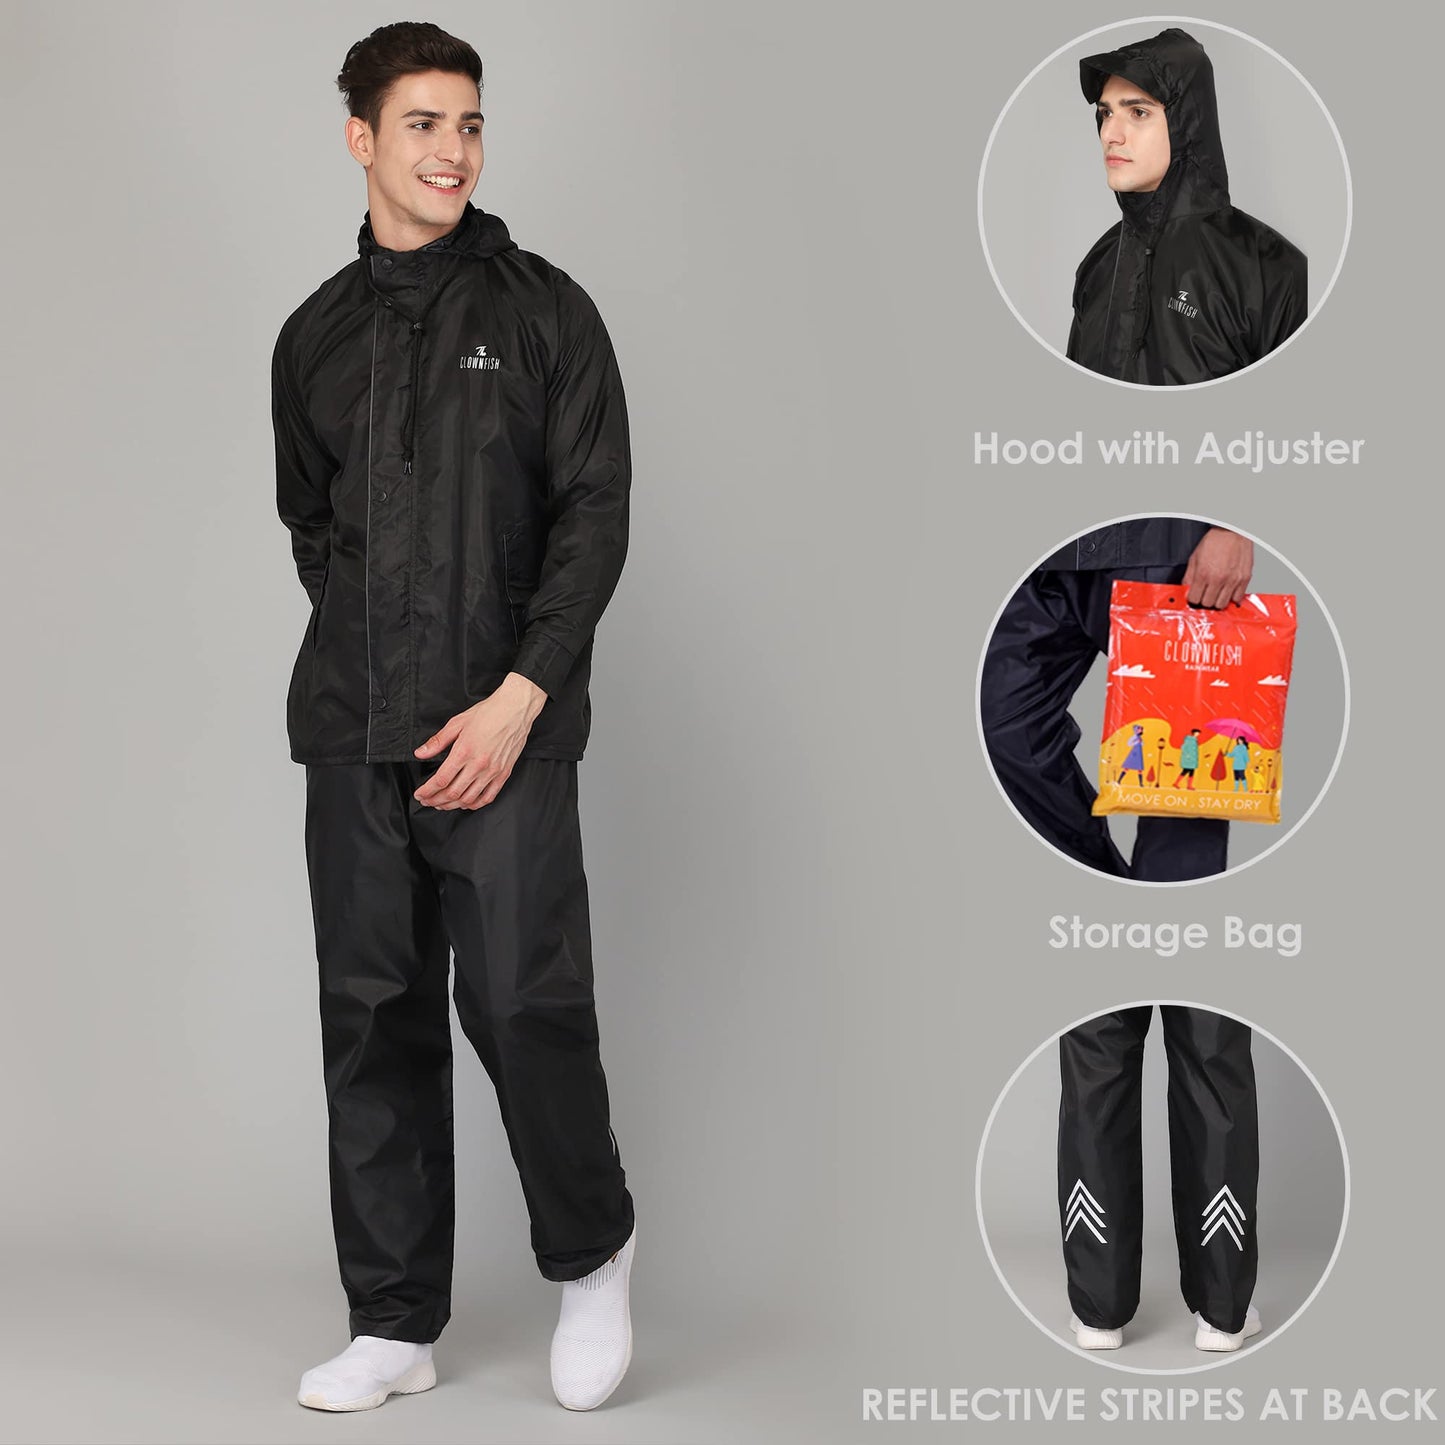 THE CLOWNFISH Rain Coat for Men Waterproof Raincoat with Pants Polyester Reversible Double Layer Rain Coat For Men Bike Rain Suit Rain Jacket Suit Inner Mobile Pocket with Storage Bag (Black XXXL)